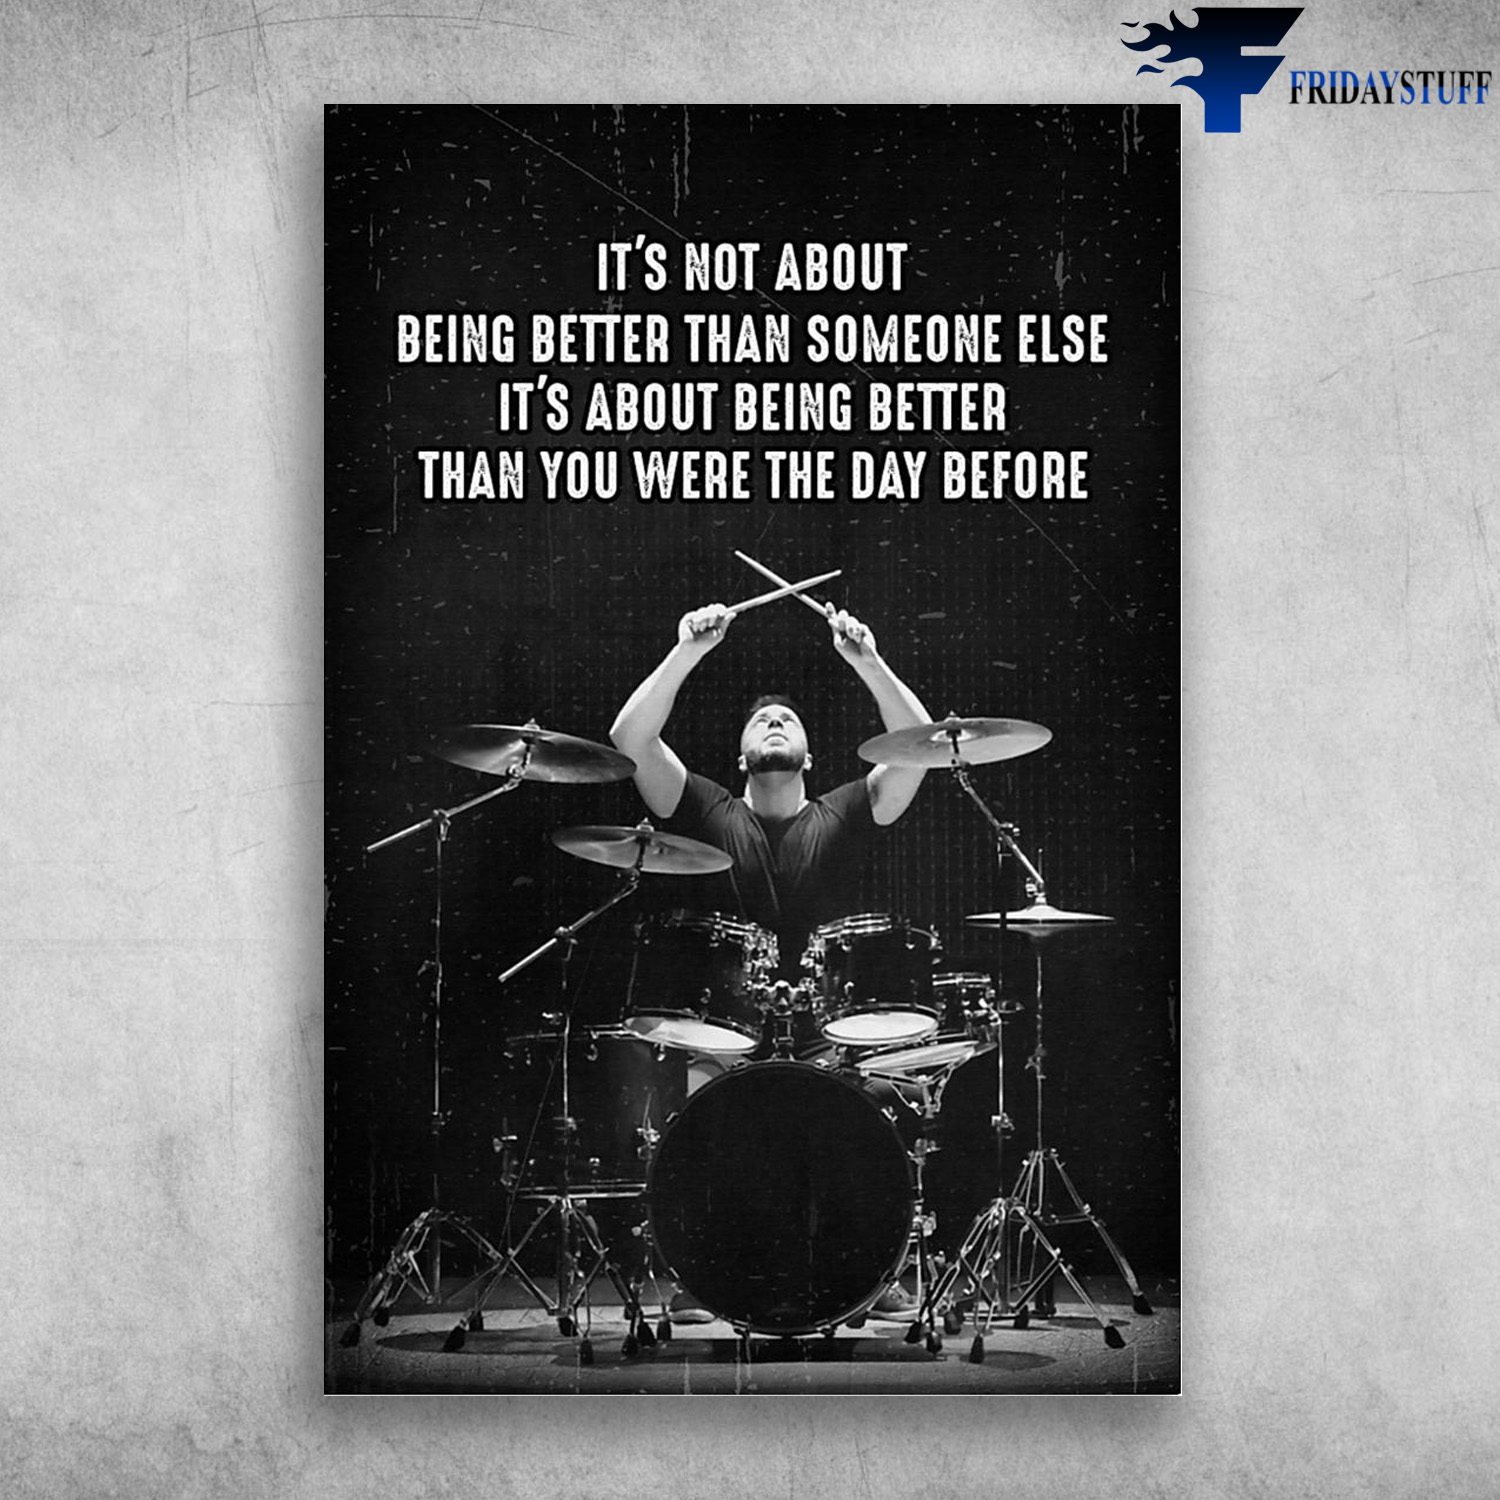 The Drummer - It's Not About Being Better Than Someone Else, It's About Being Better Than You Were The Day Before